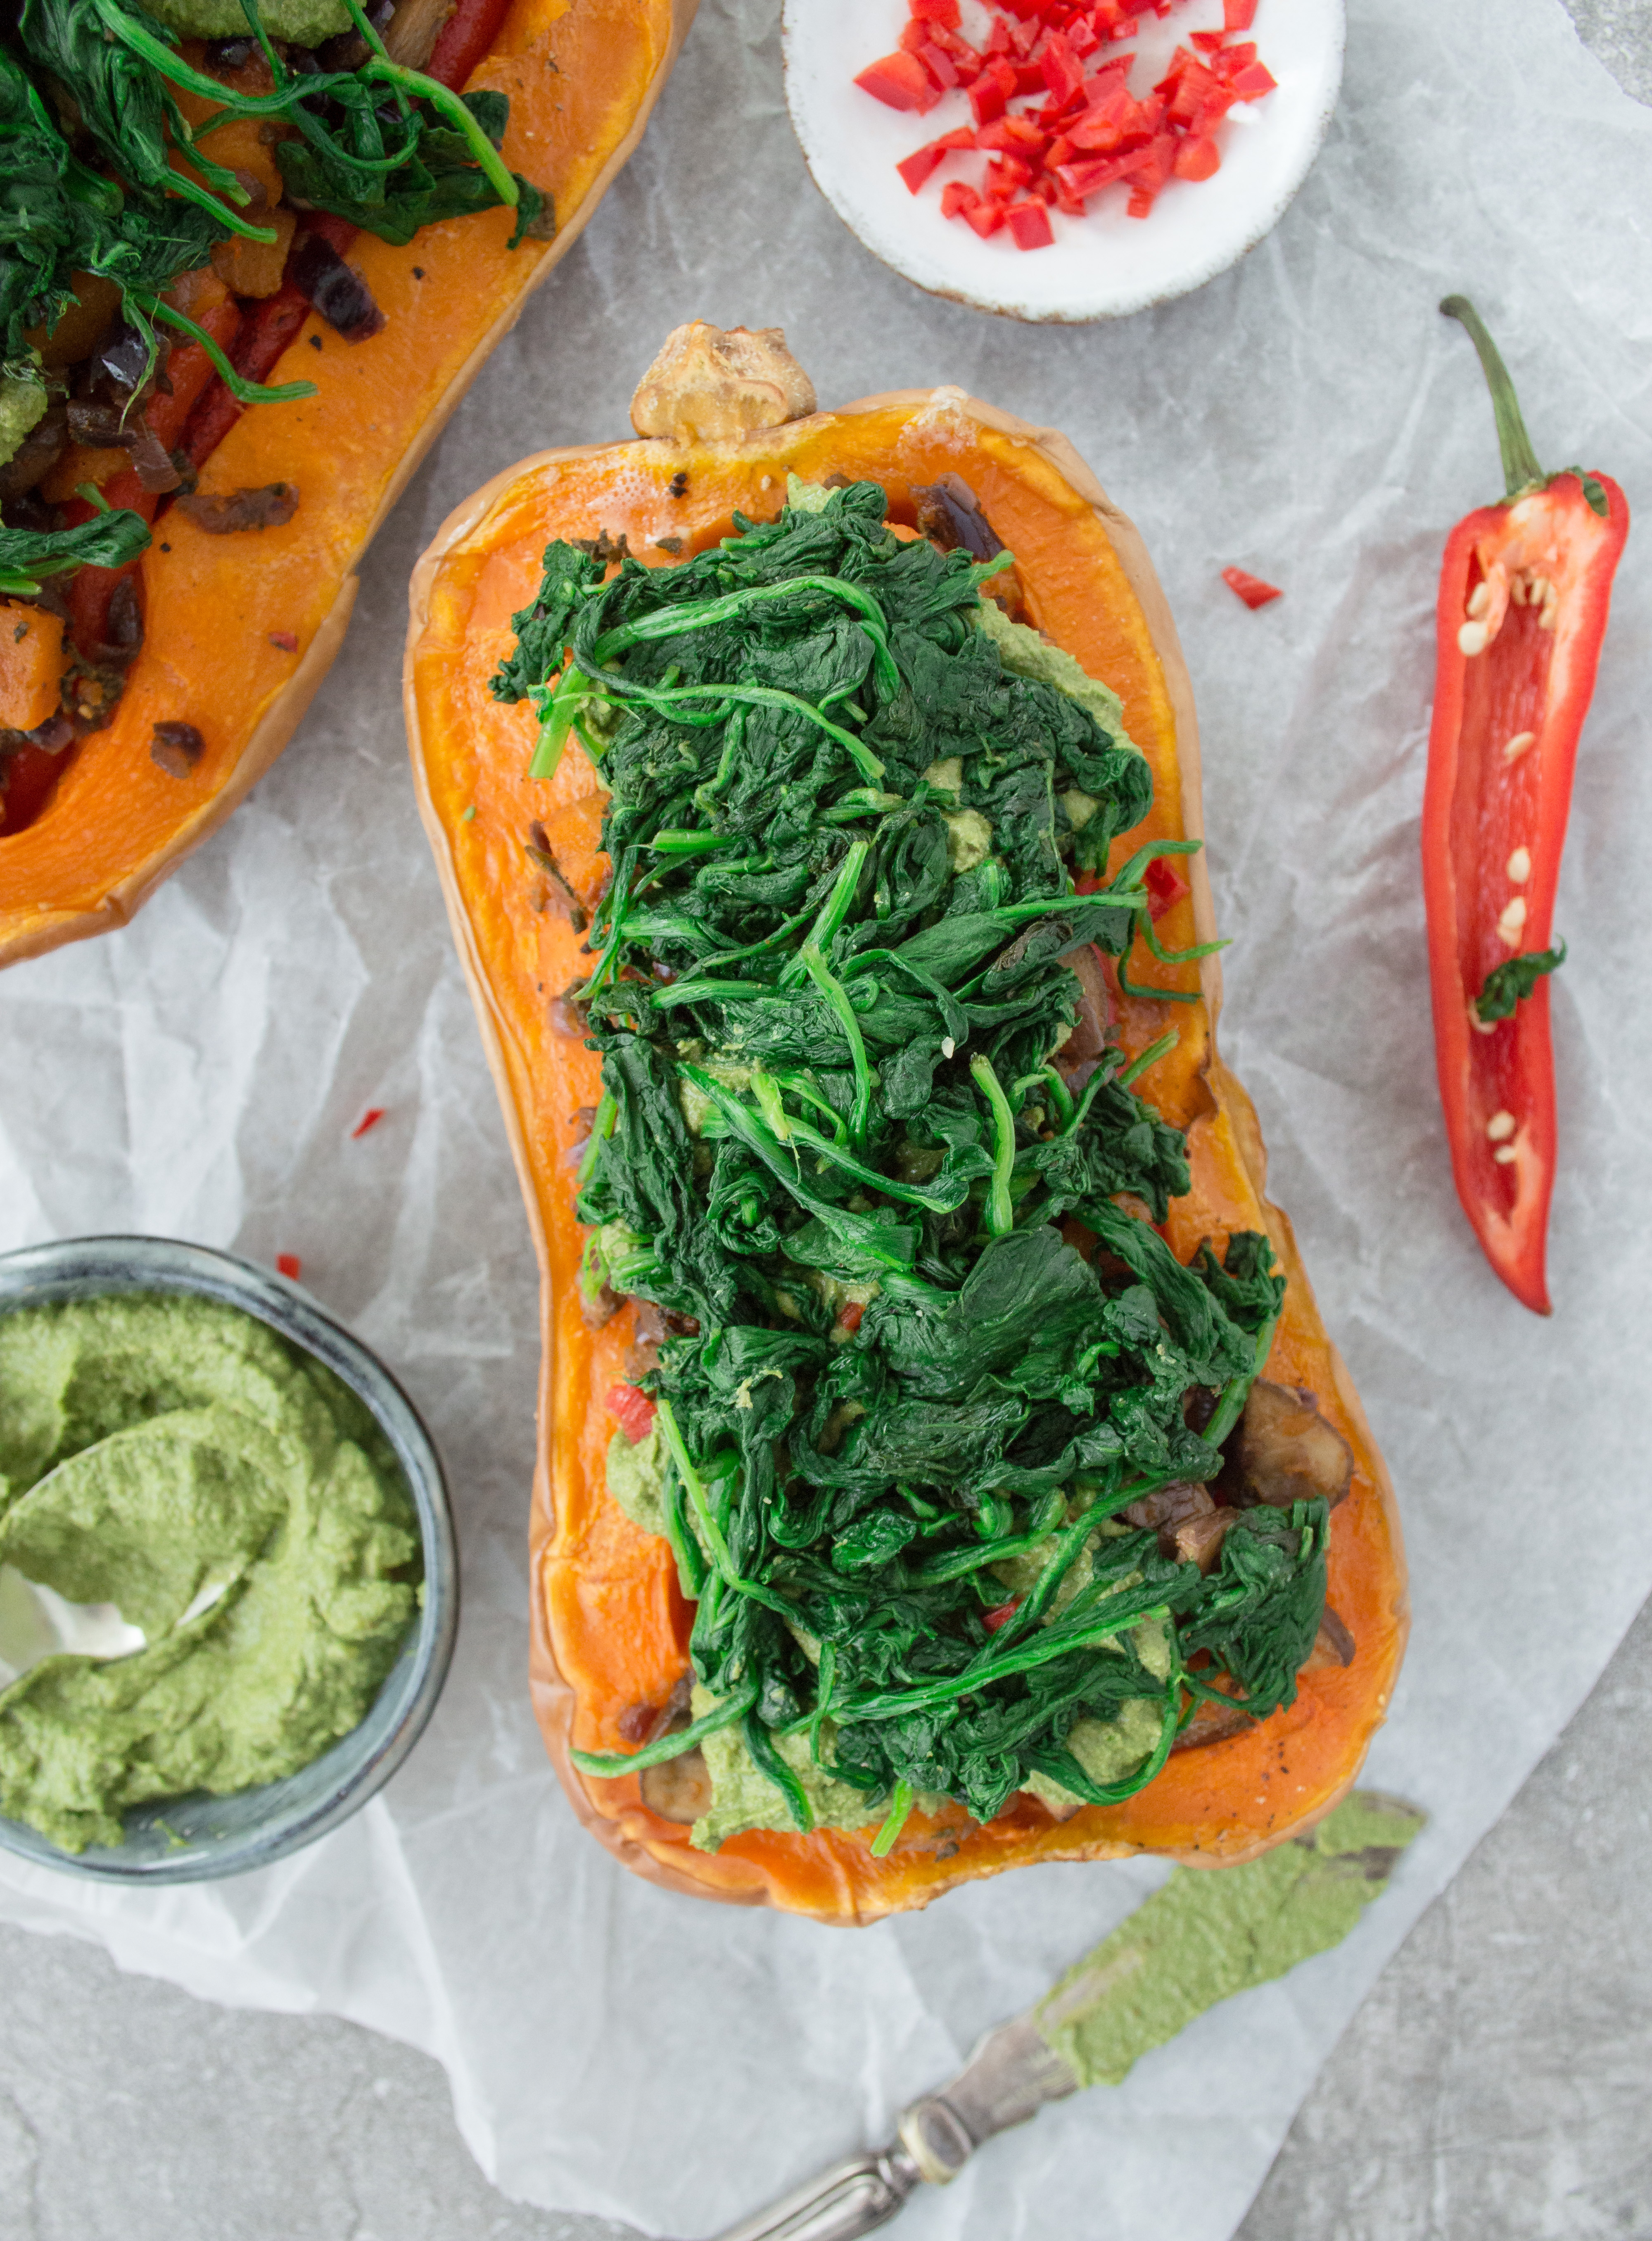 Butternut squash halves stuffed with spinach and vegetables